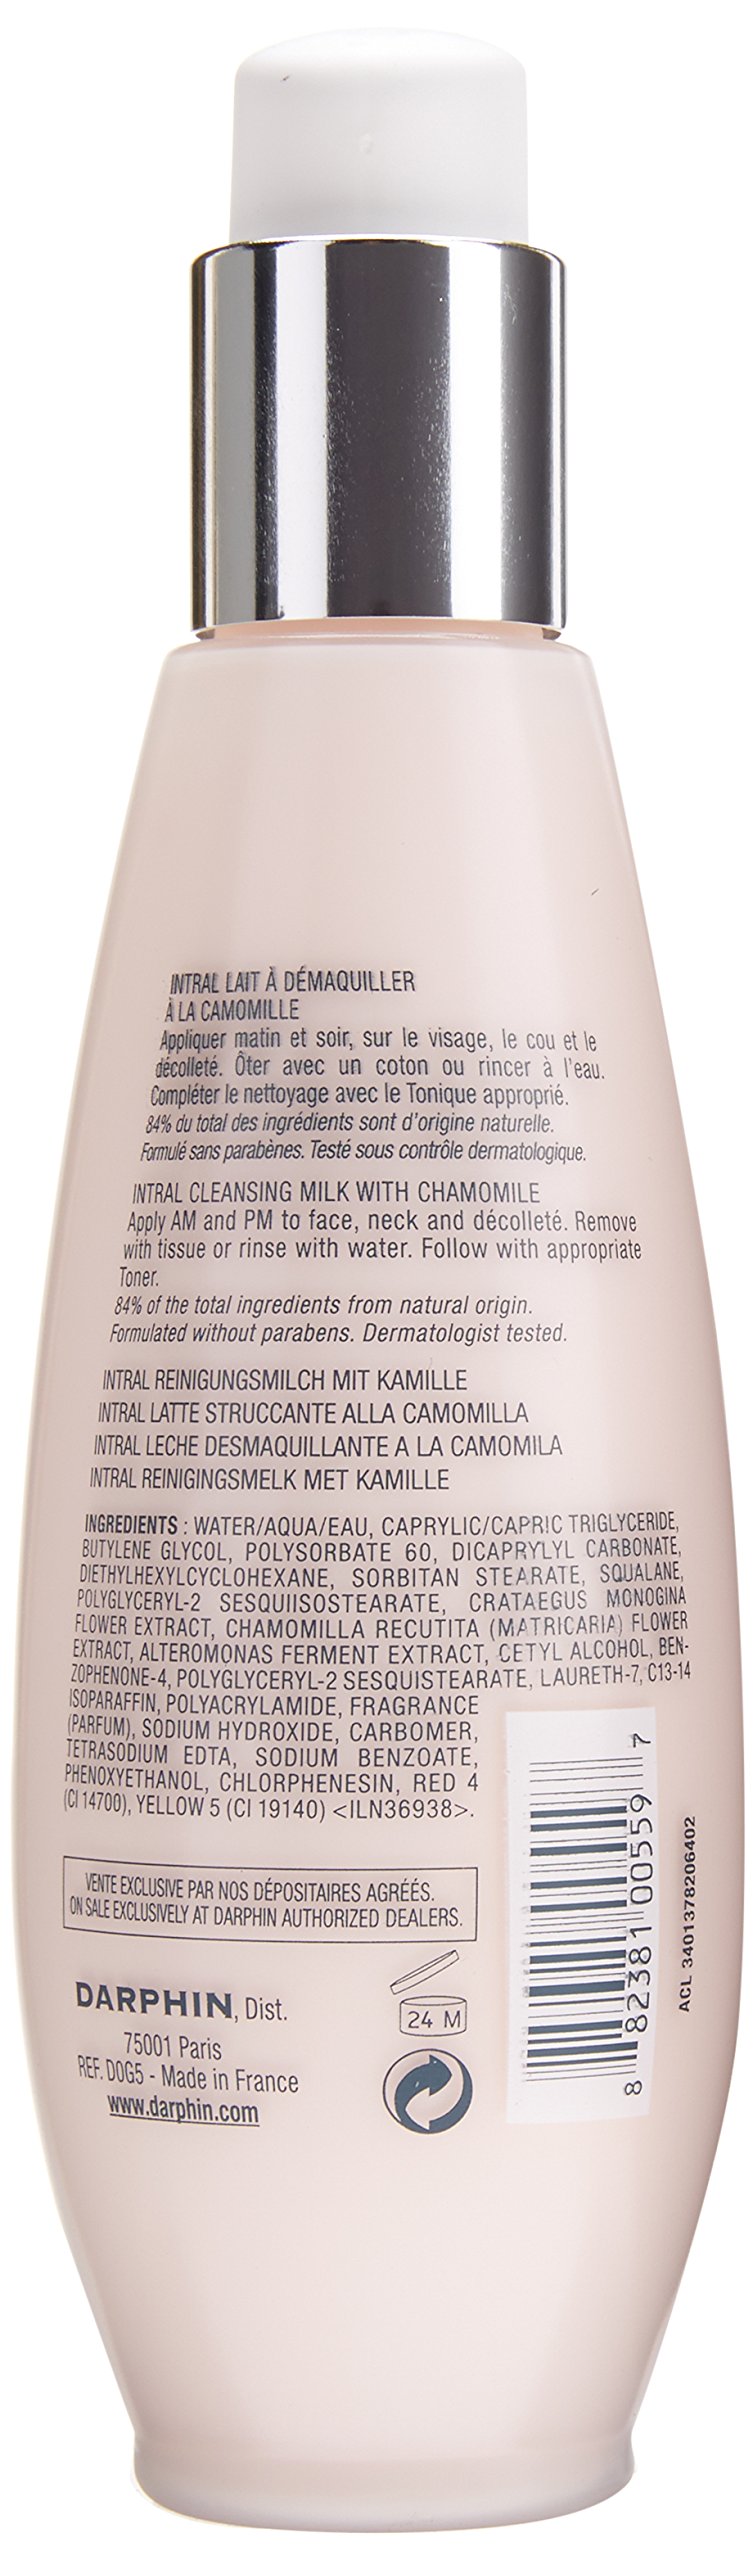 [Australia] - Intral Cleansing Milk With Chamomile by Darphin for Women - 6.7 oz Cleansing Milk 